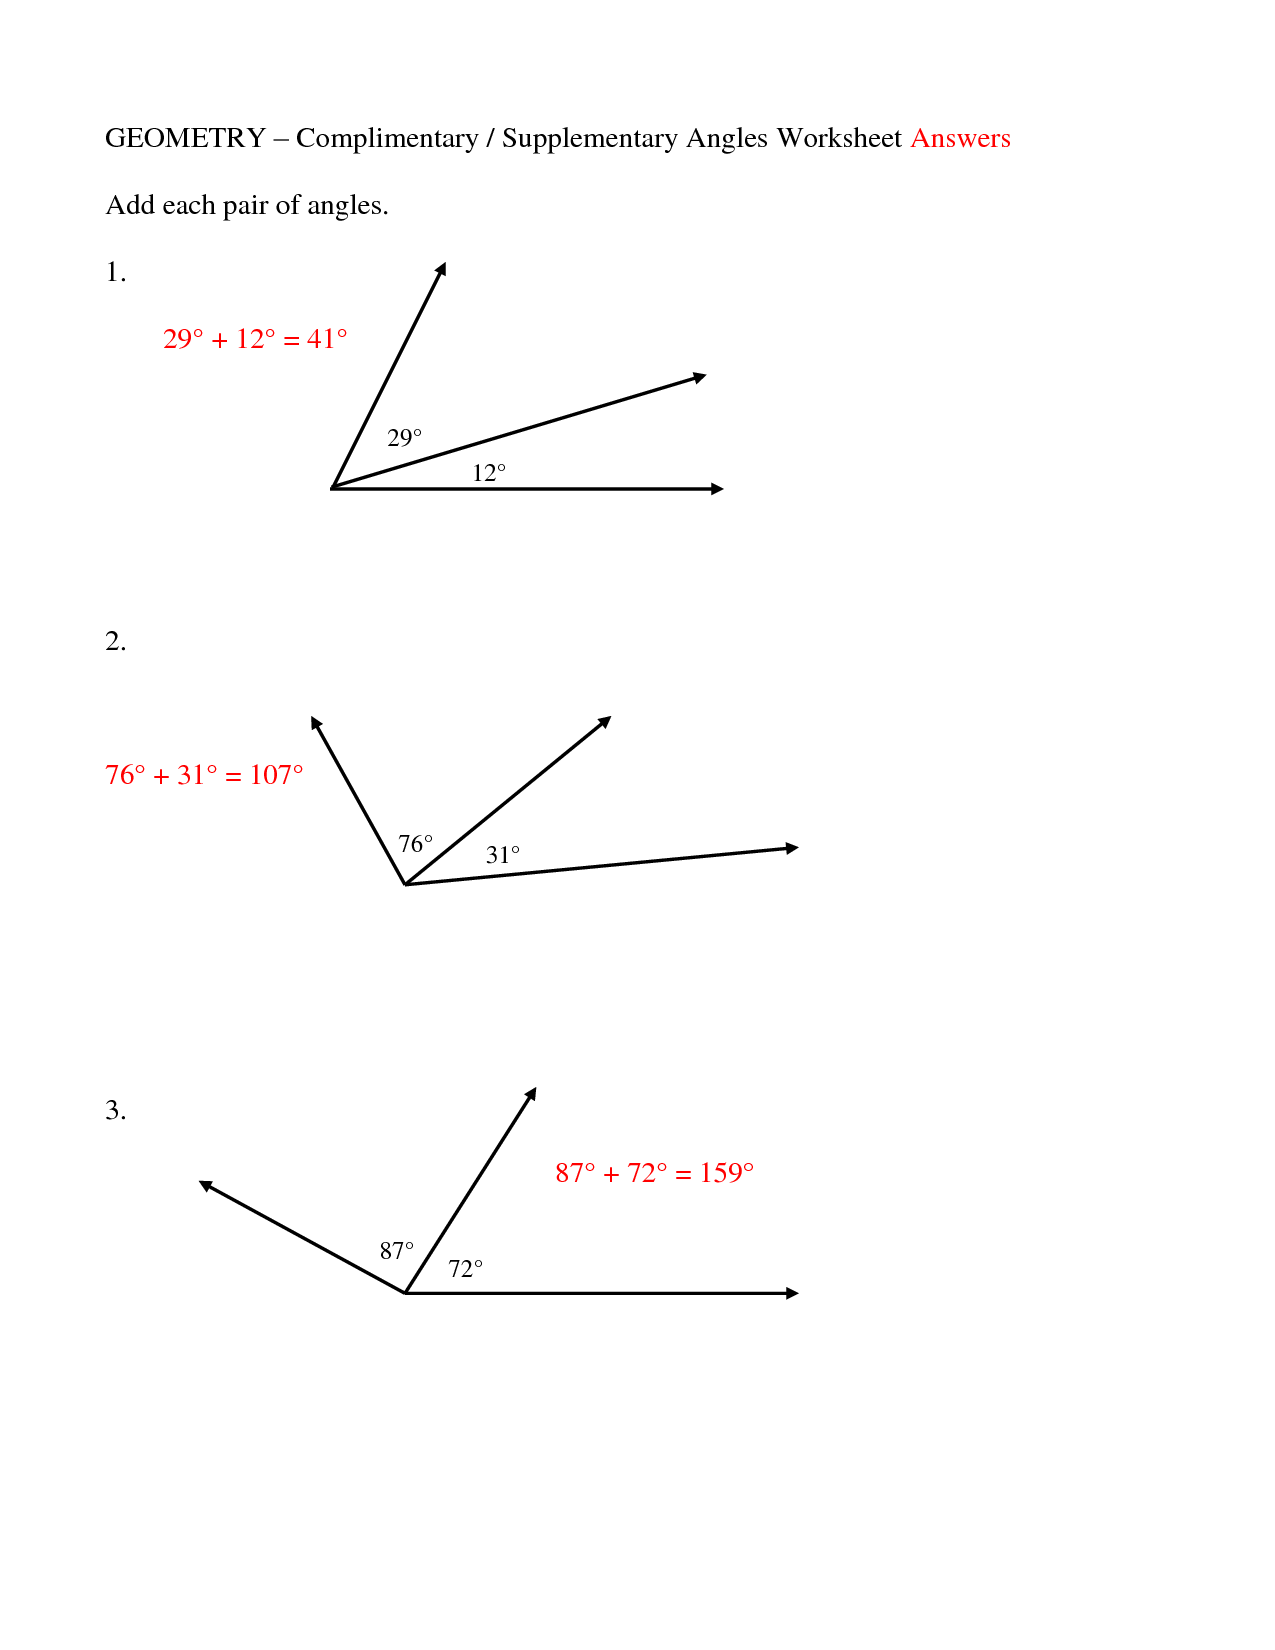 13-best-images-of-worksheets-complementary-and-supplementary-angles